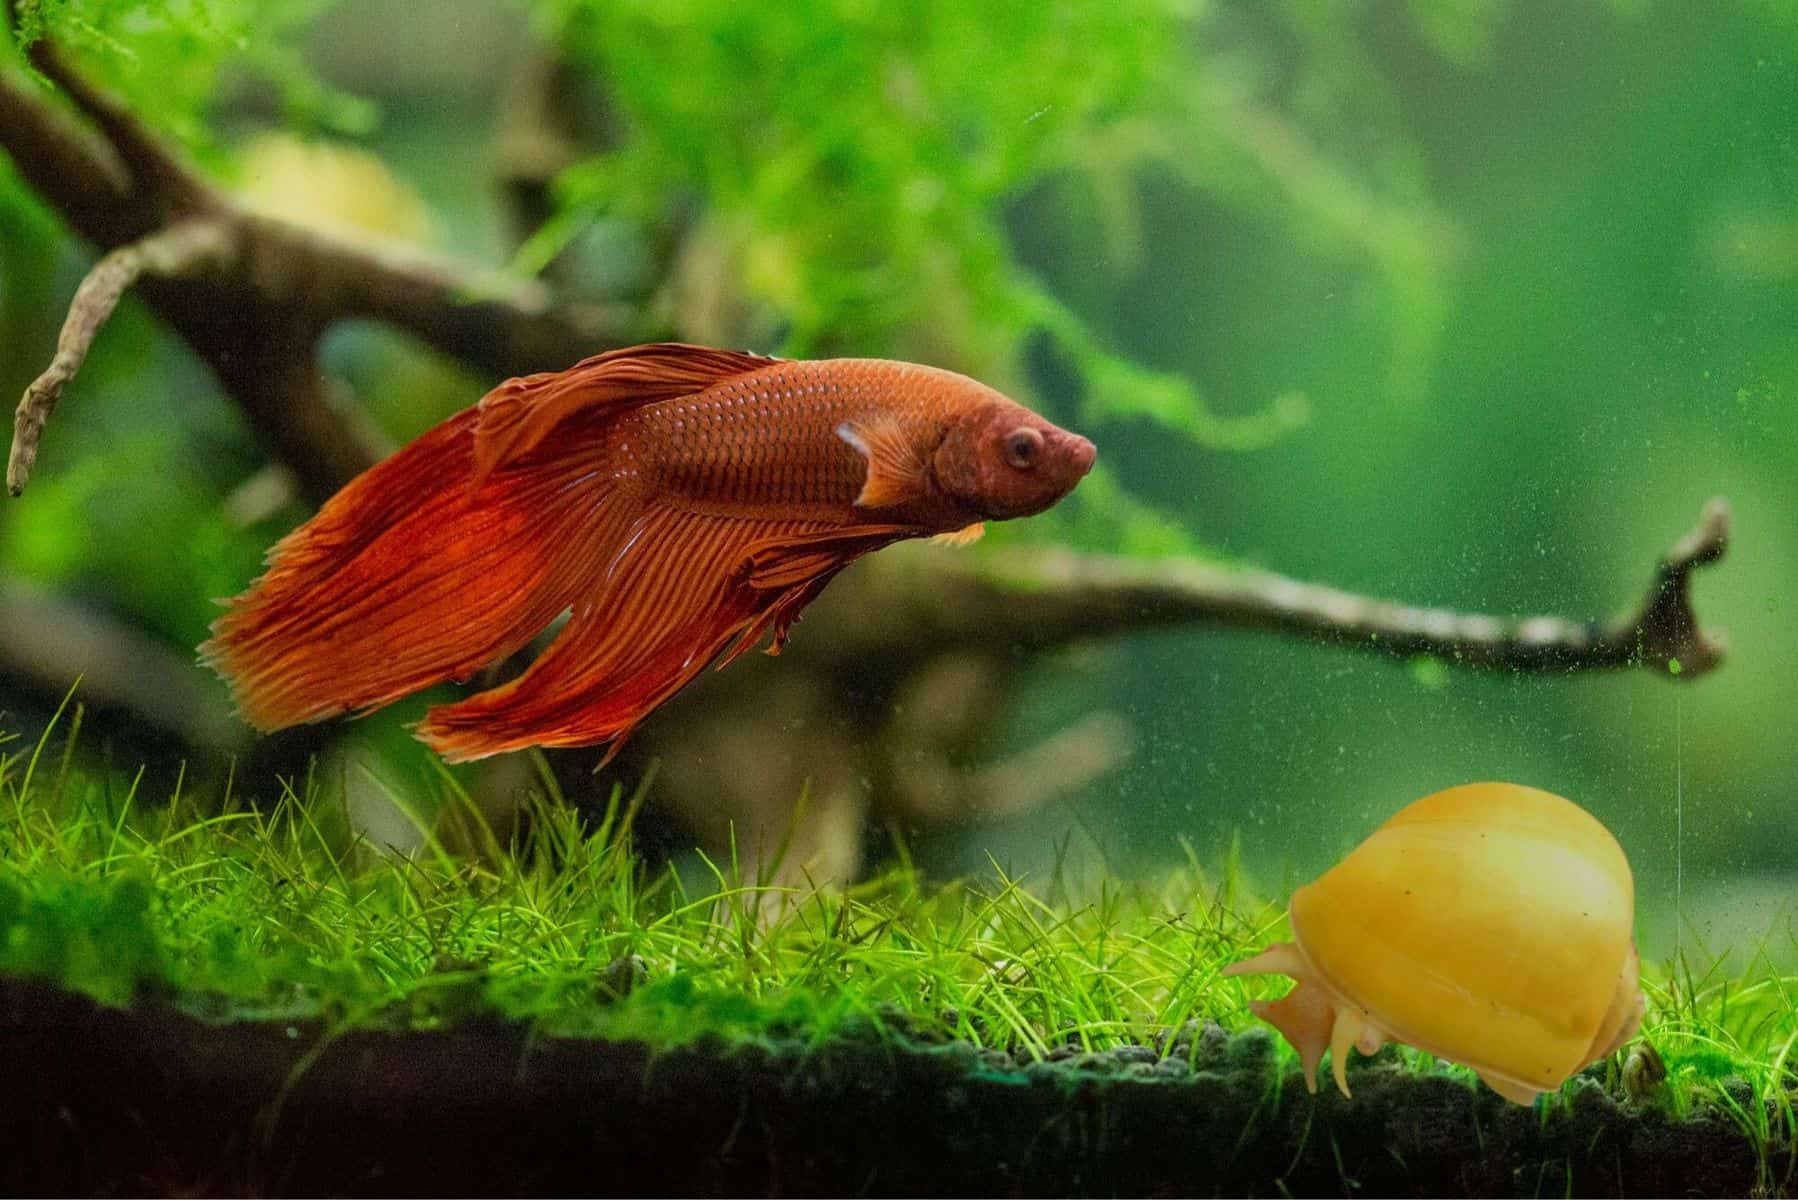 Are Mystery Snail And Betta Fish Compatible?